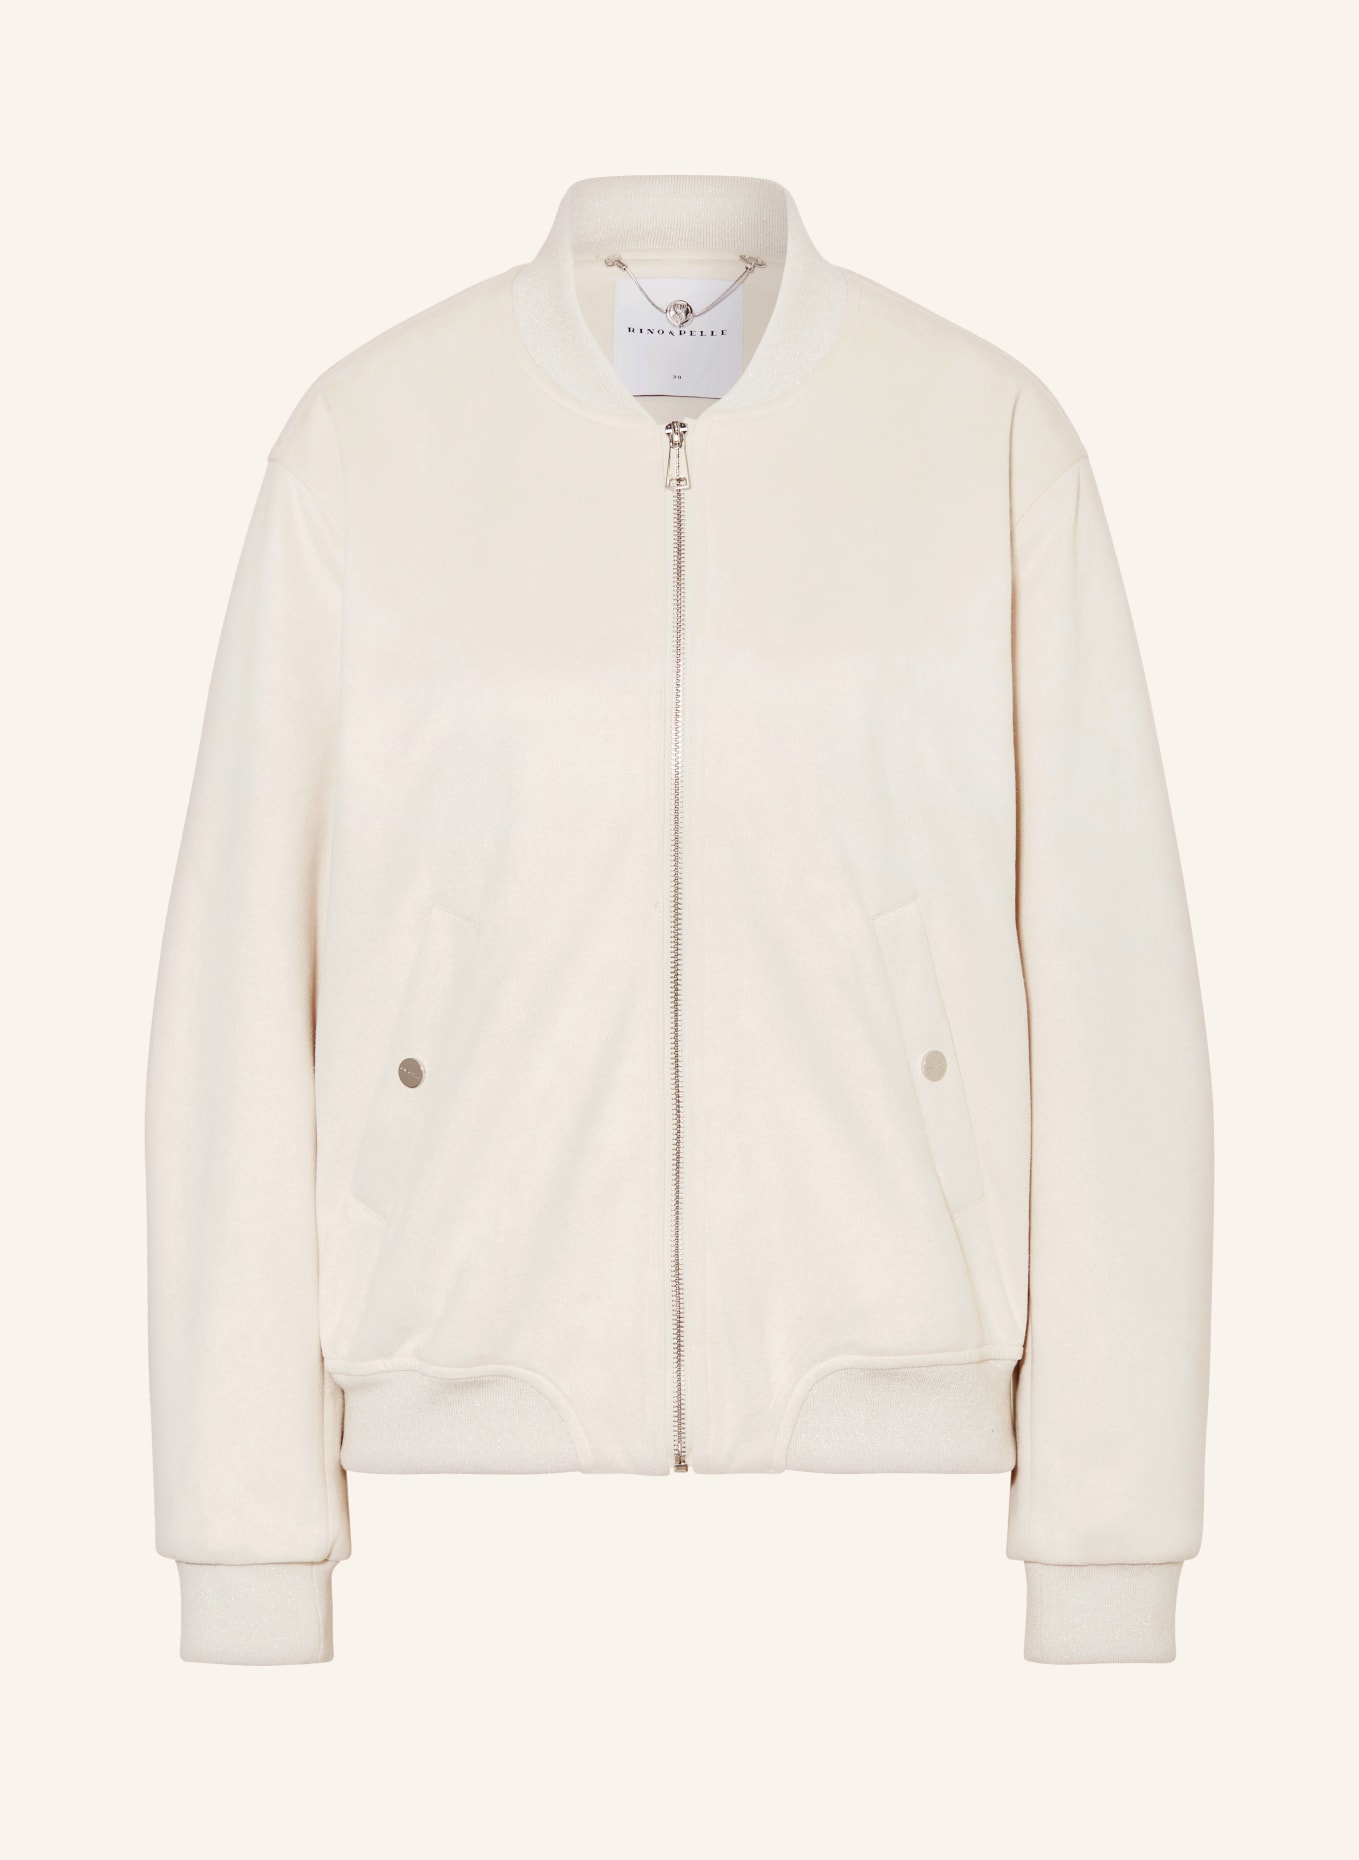 RINO & PELLE Bomber jacket EVELIN in leather look, Color: CREAM (Image 1)